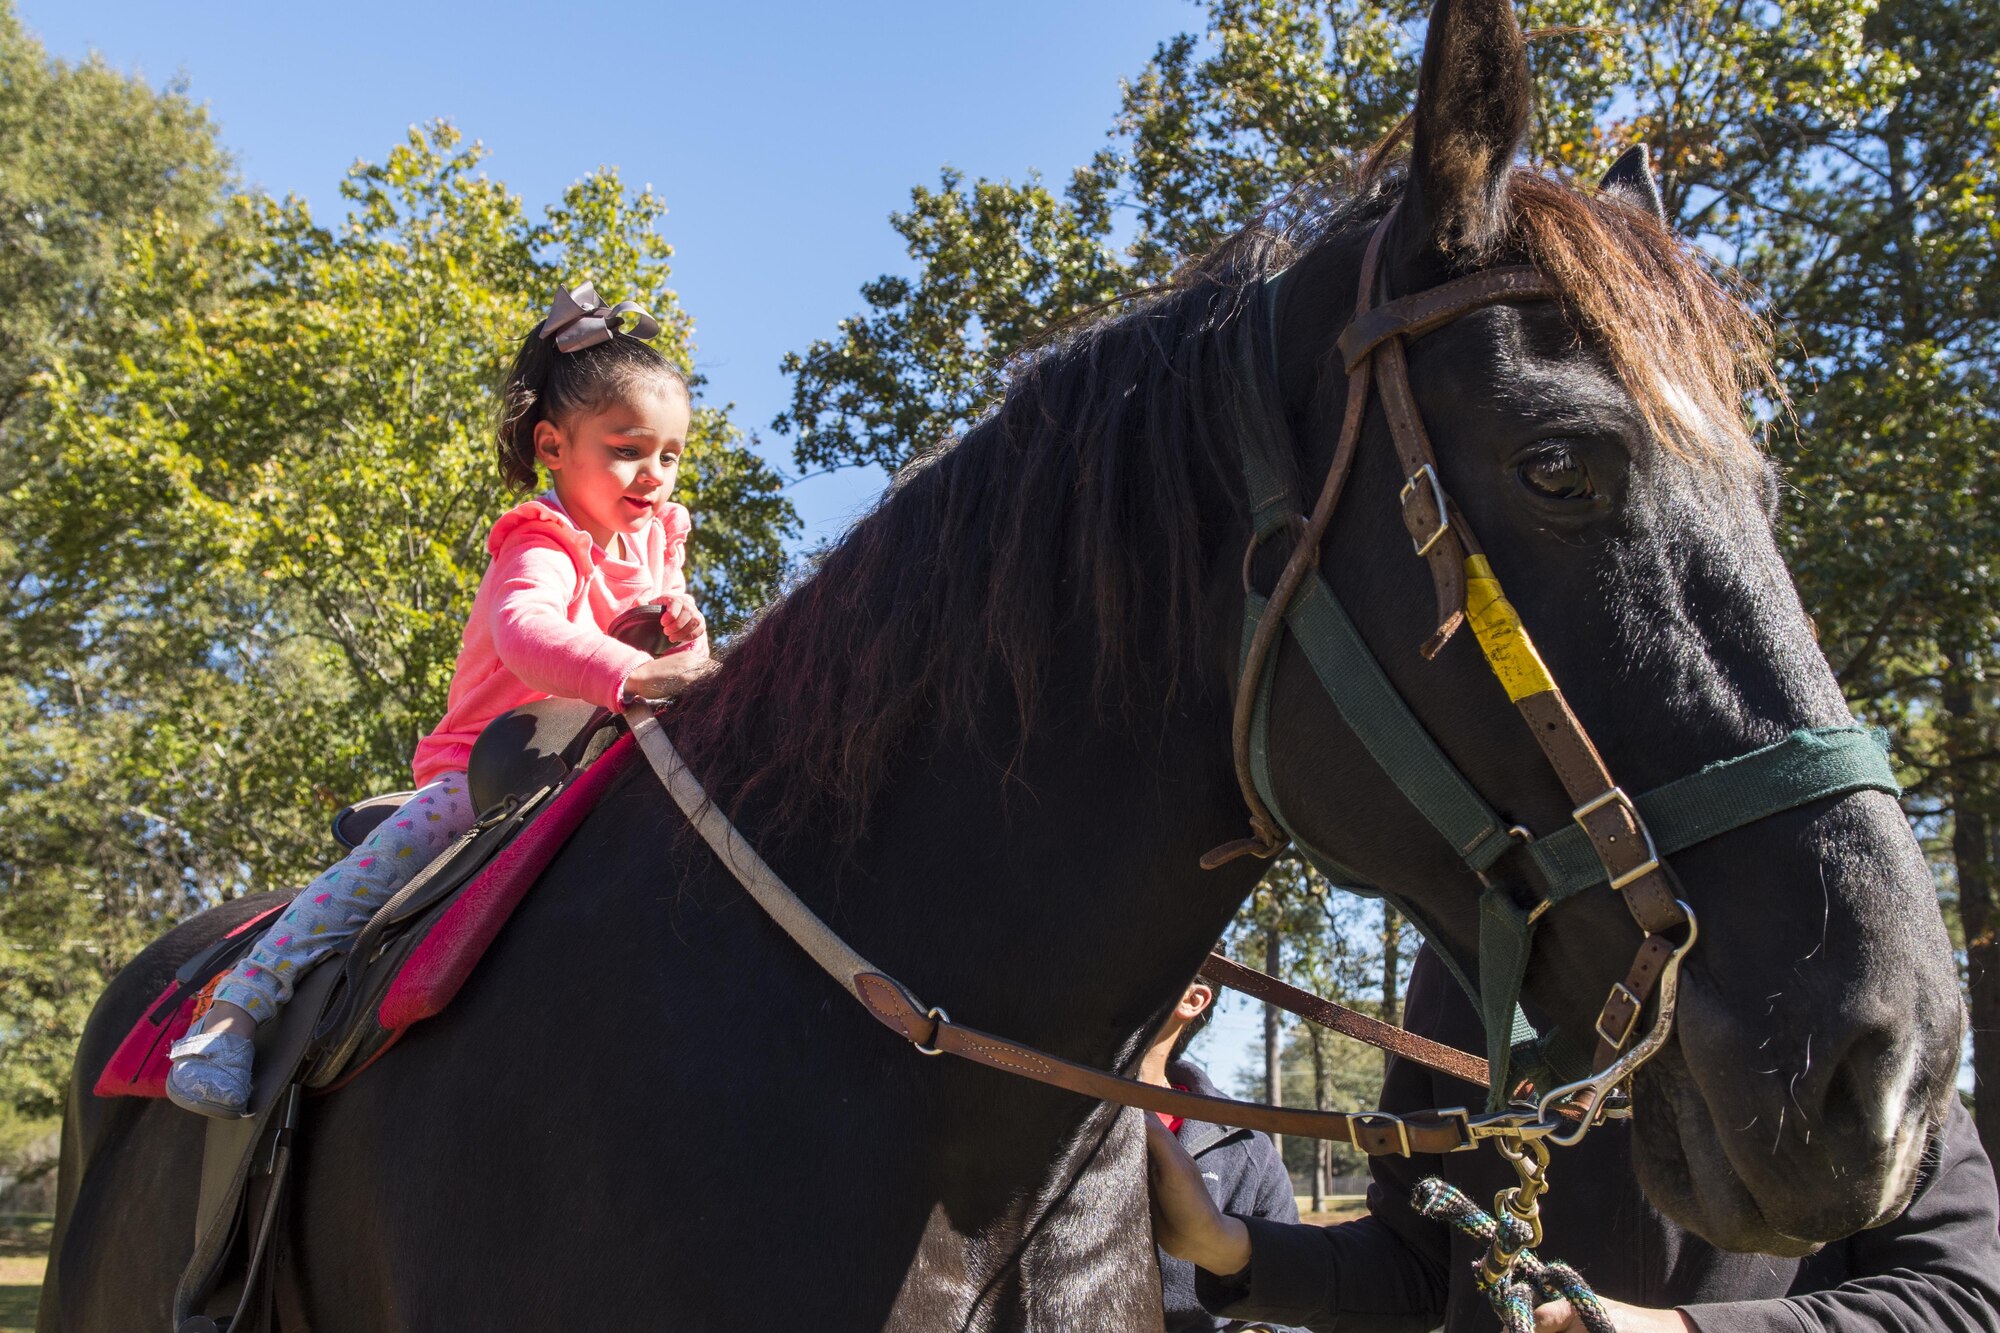 The daughter of Senior Airman Karena Quiroz, 4th Fighter Wing command support staff, rides a horse during an annual Military Family Appreciation event, Nov. 5, 2016, at Seymour Johnson Air Force Base, North Carolina. Various helping agencies such as Military OneSource, Airmen Against Drunk Driving, the Health and Wellness Center and multiple local businesses also had booths set up during the event to educate members on the resources and benefits available to them all year. (U.S. Air Force photo by Airman Shawna L. Keyes) 